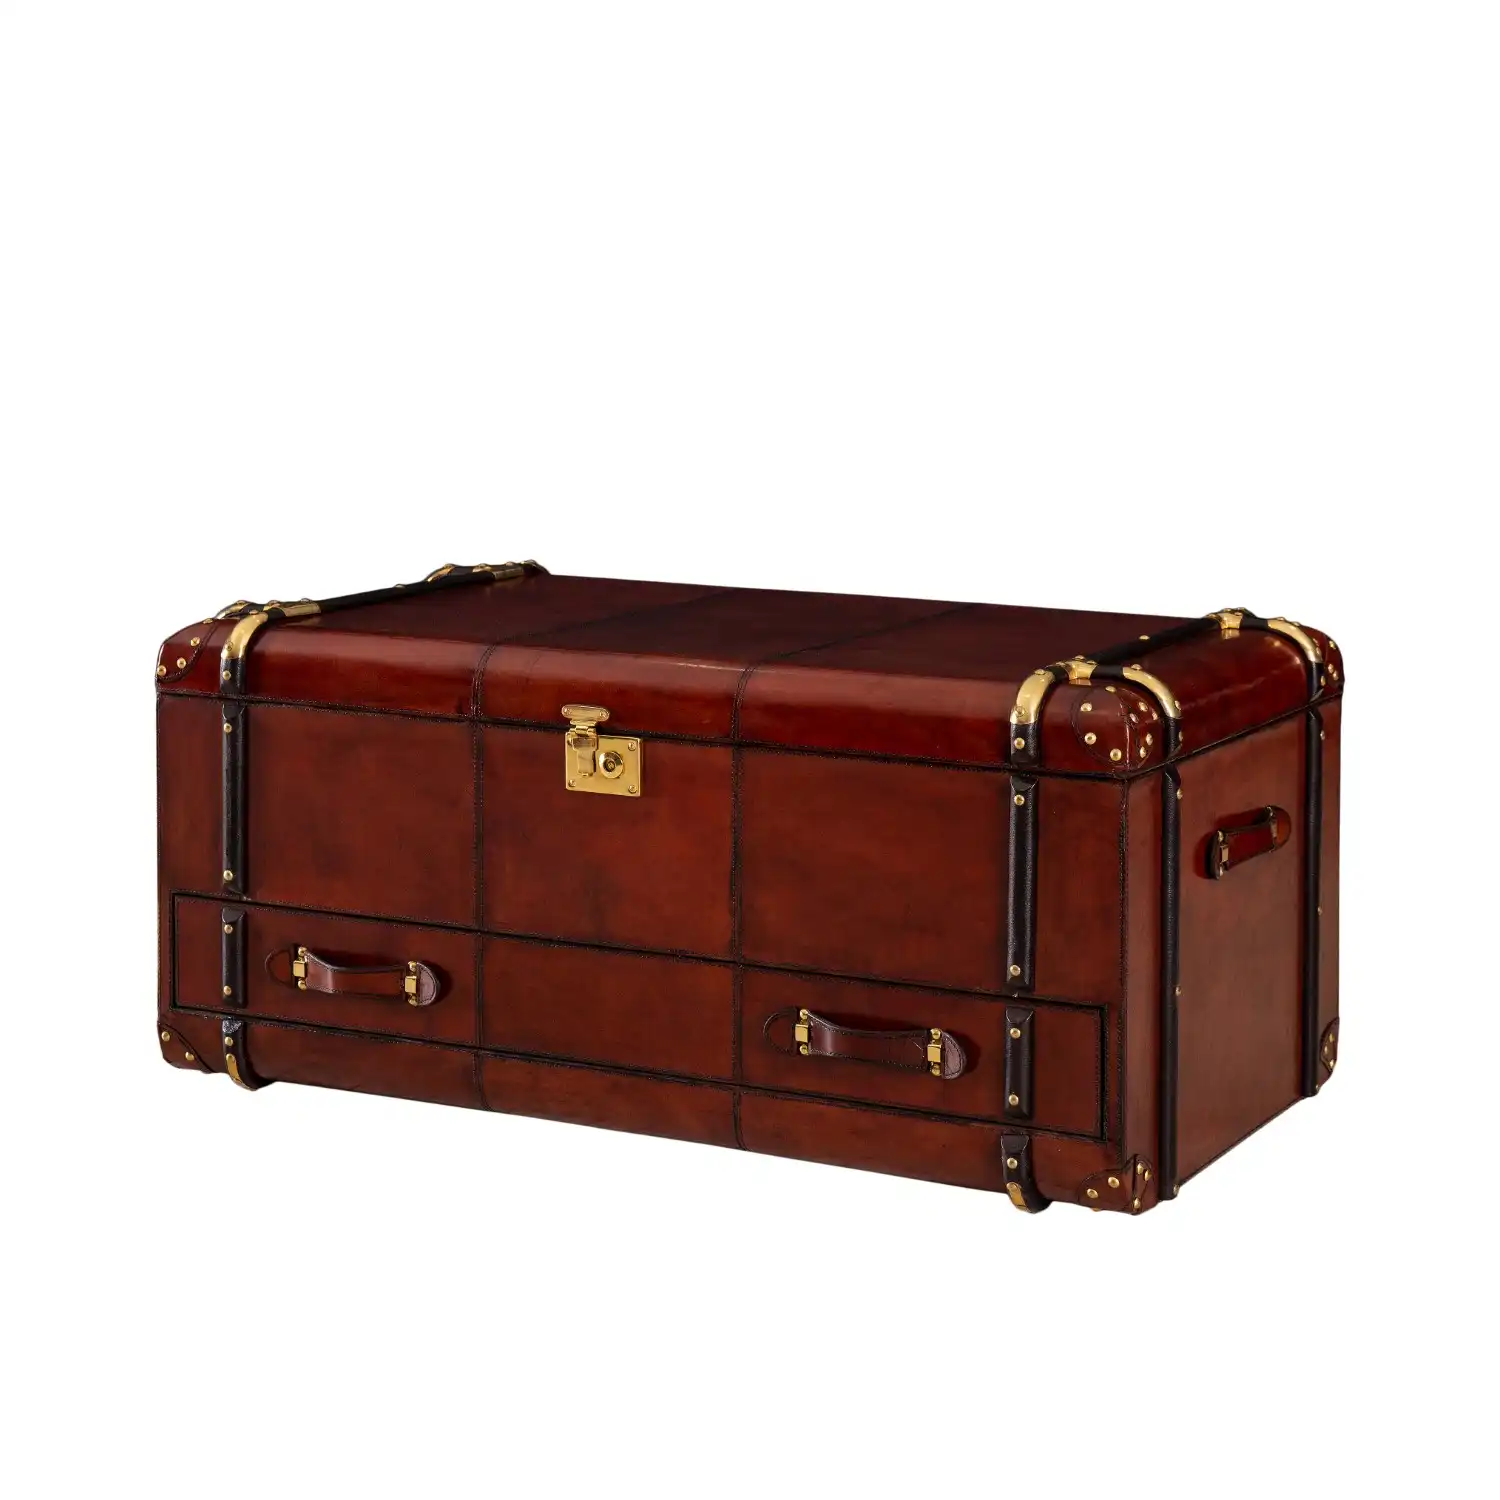 Franklin Handcrafted Leather Collection Handcrafted Leather Coffee Table Trunk With Drawer Cognac